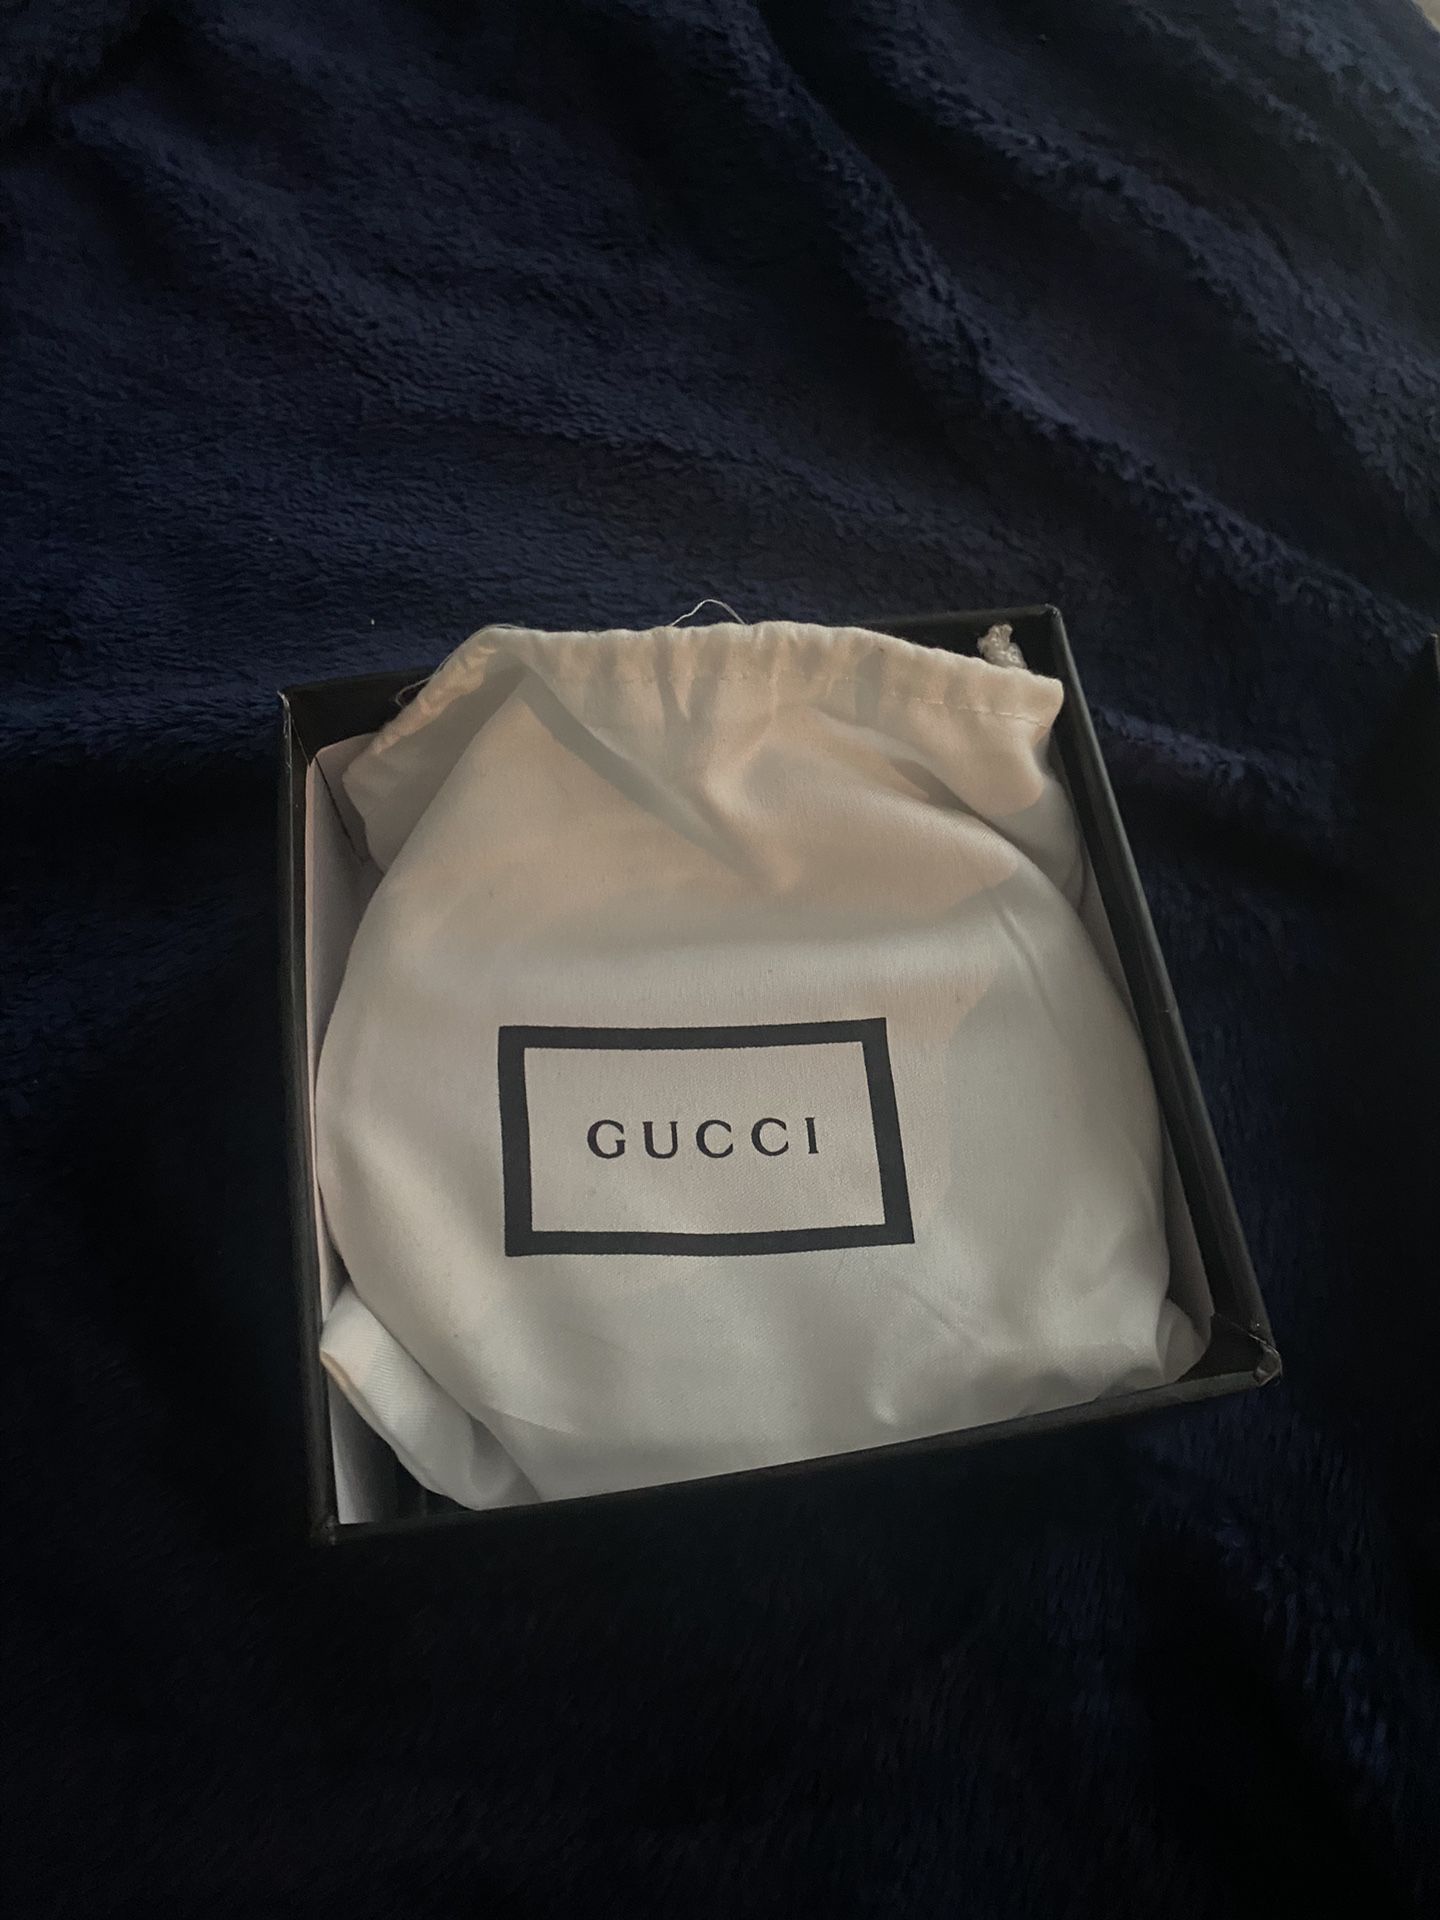 Gucci Belts for sale in Houston, Texas